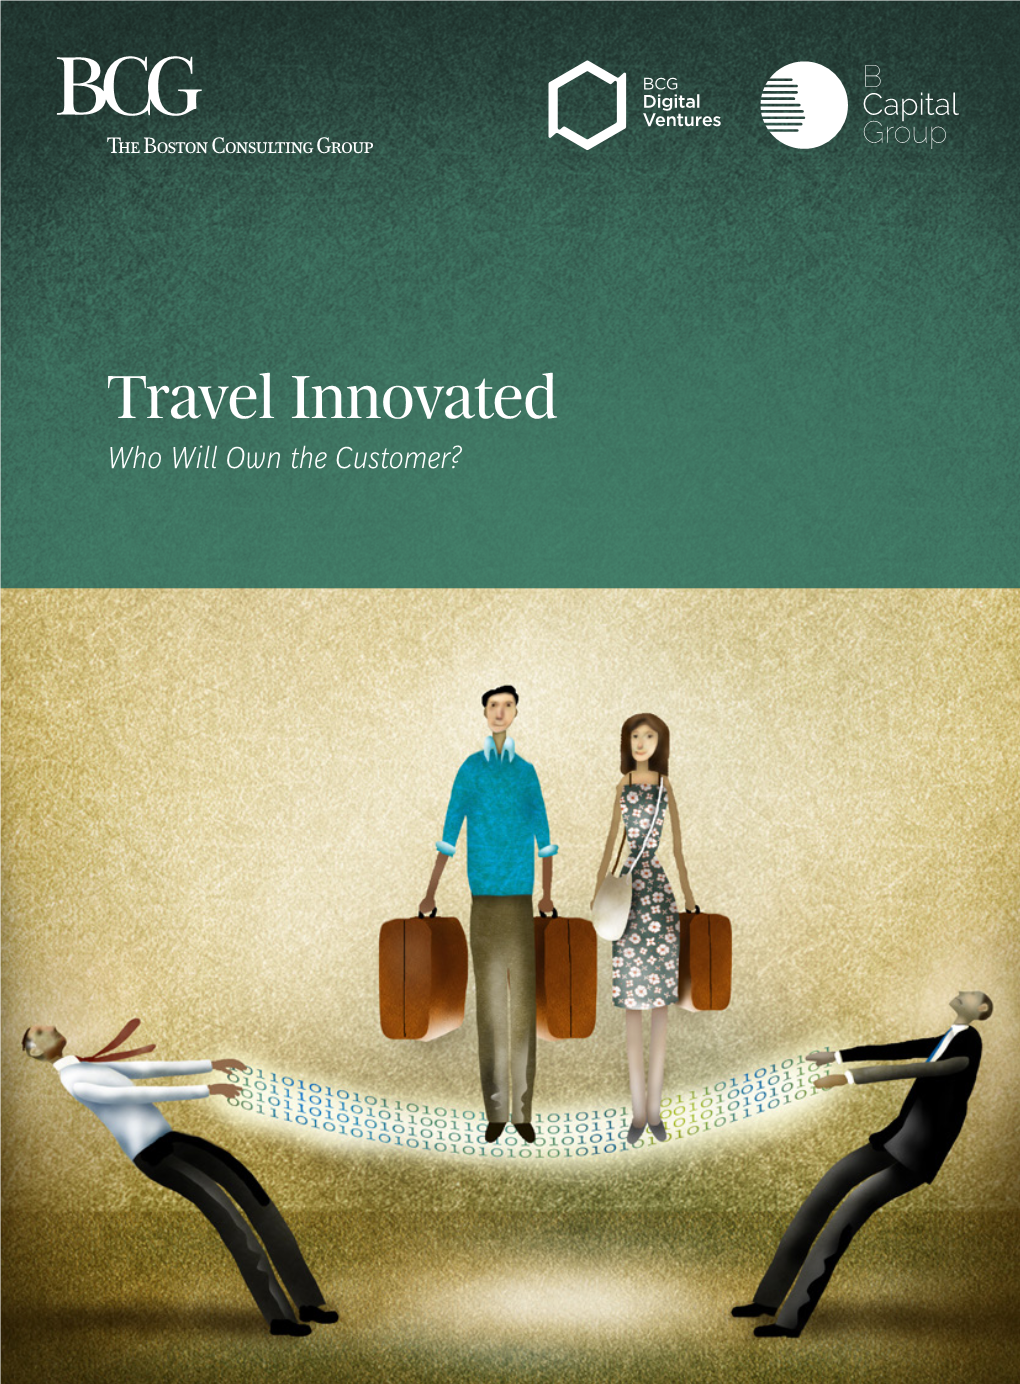 Travel Innovated